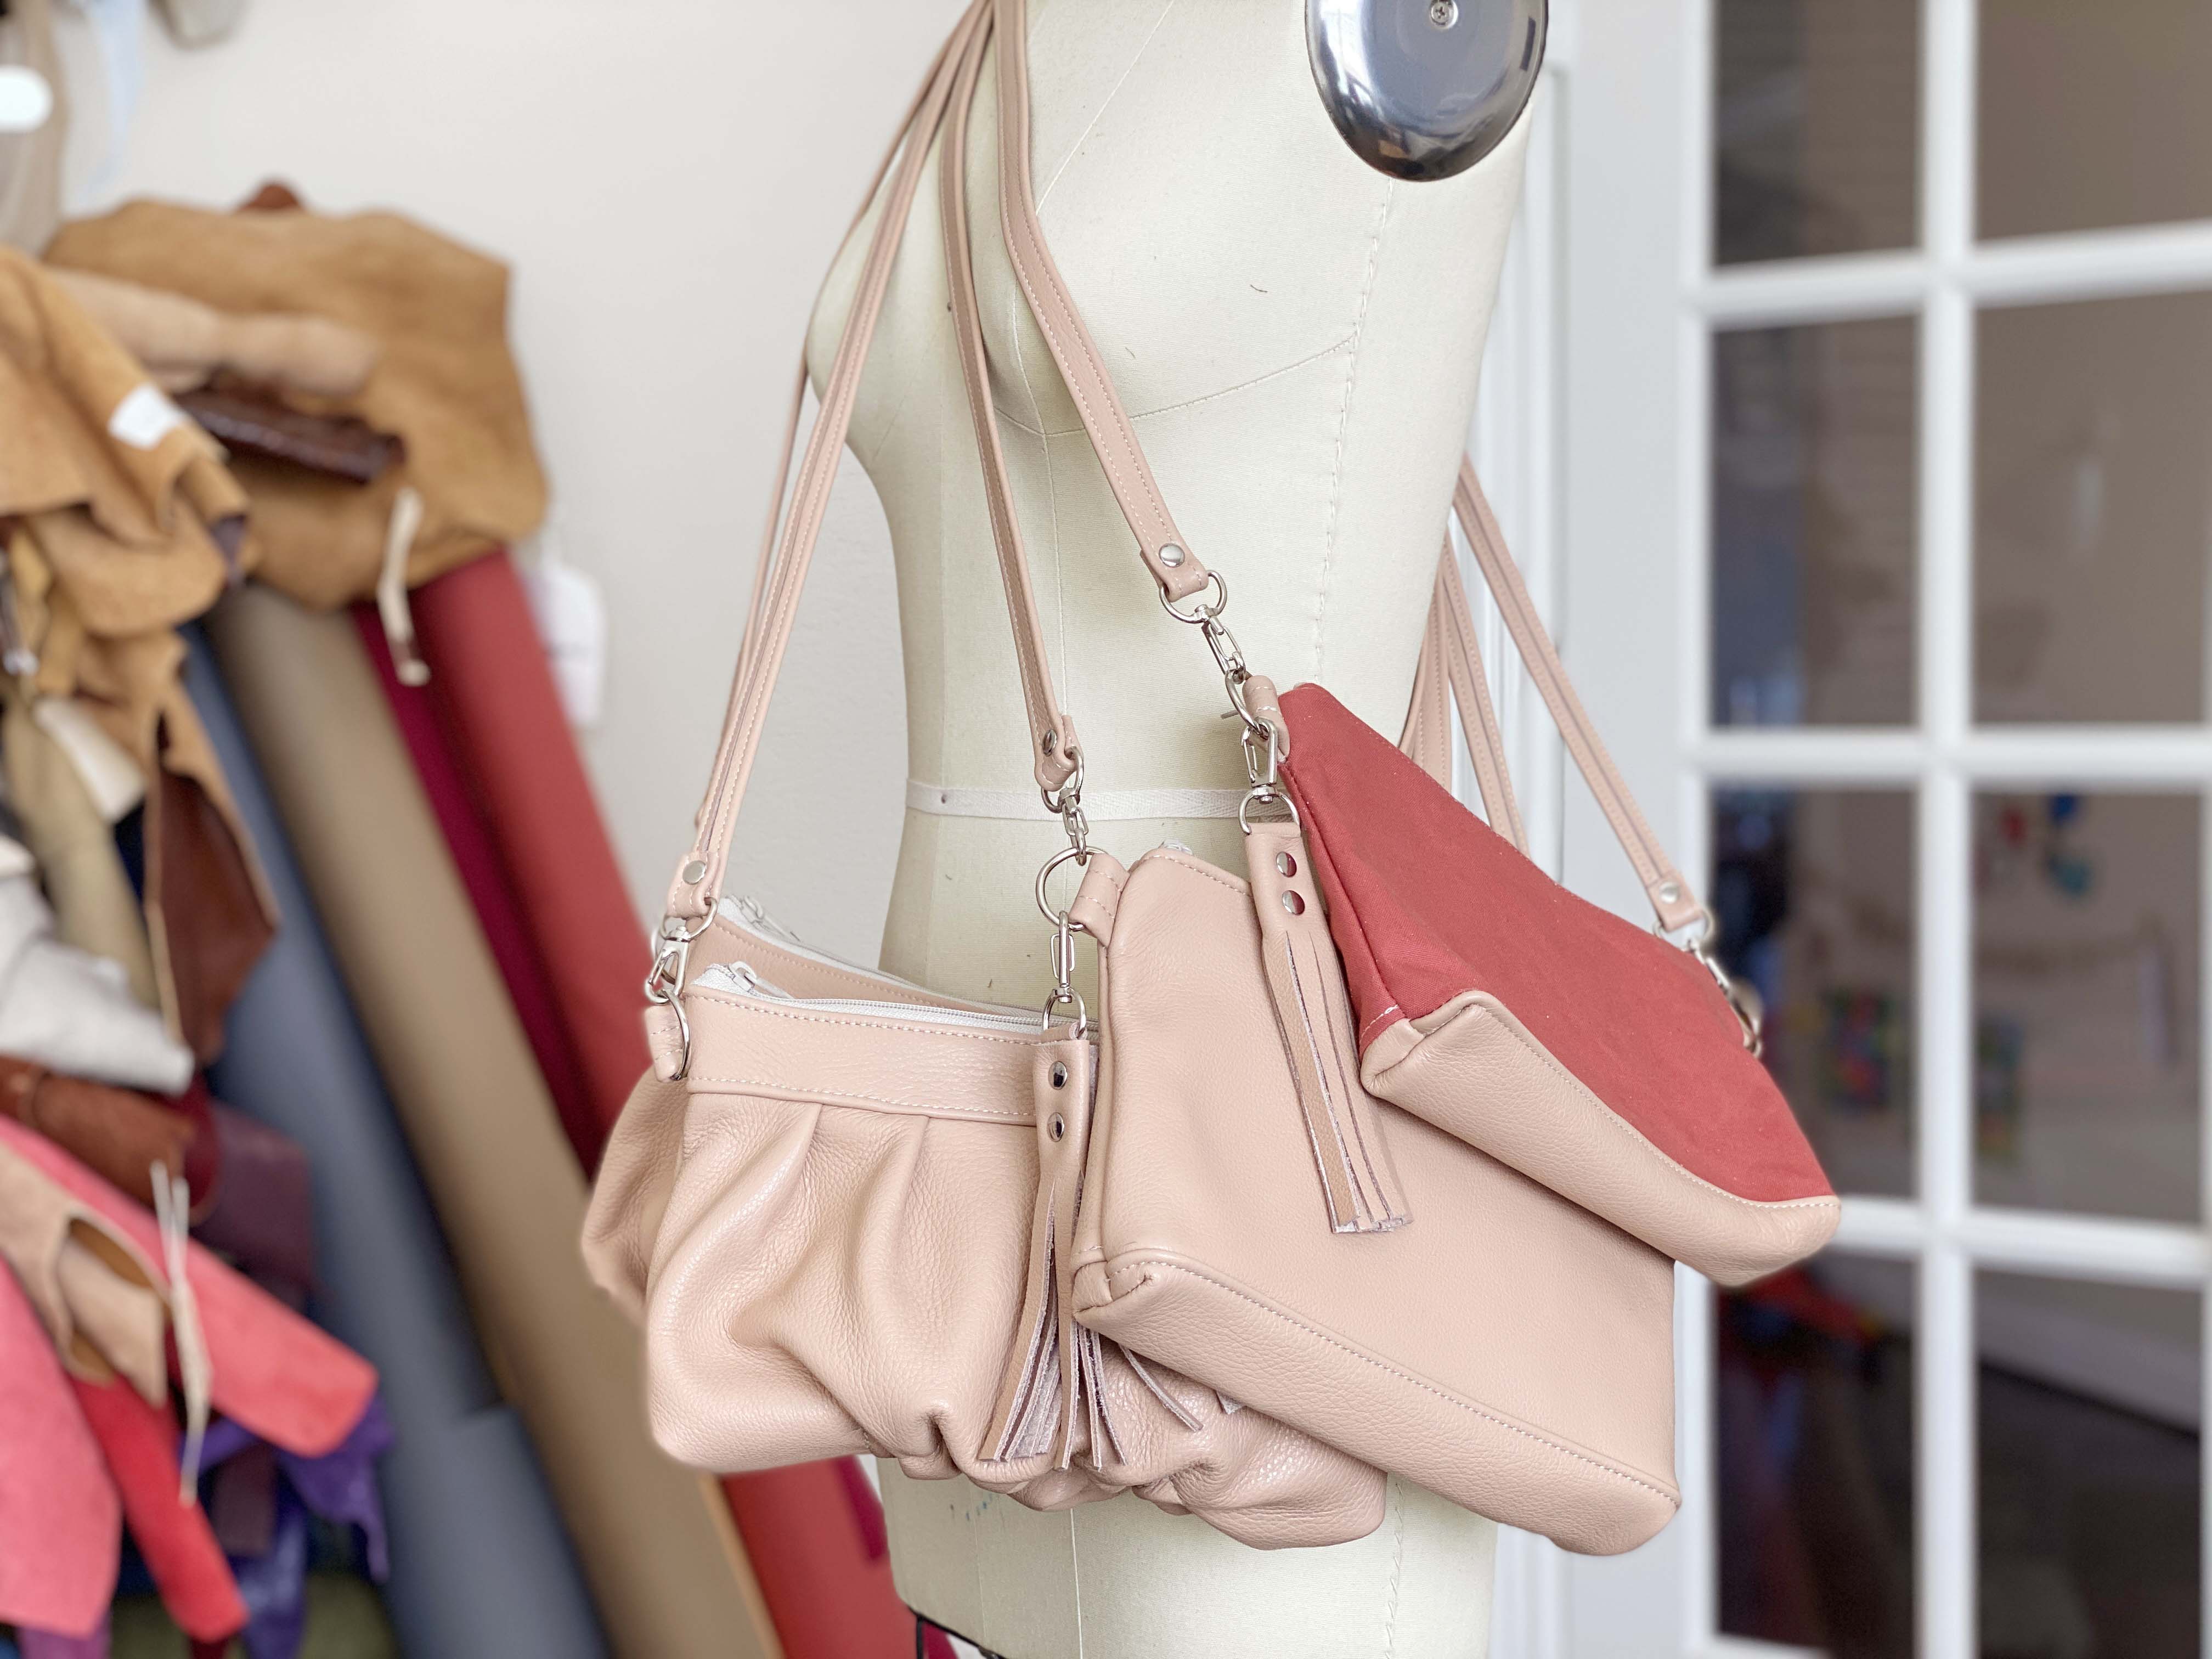 Crossbody Clutch in Faded Rose/Dusty Rose, RTS